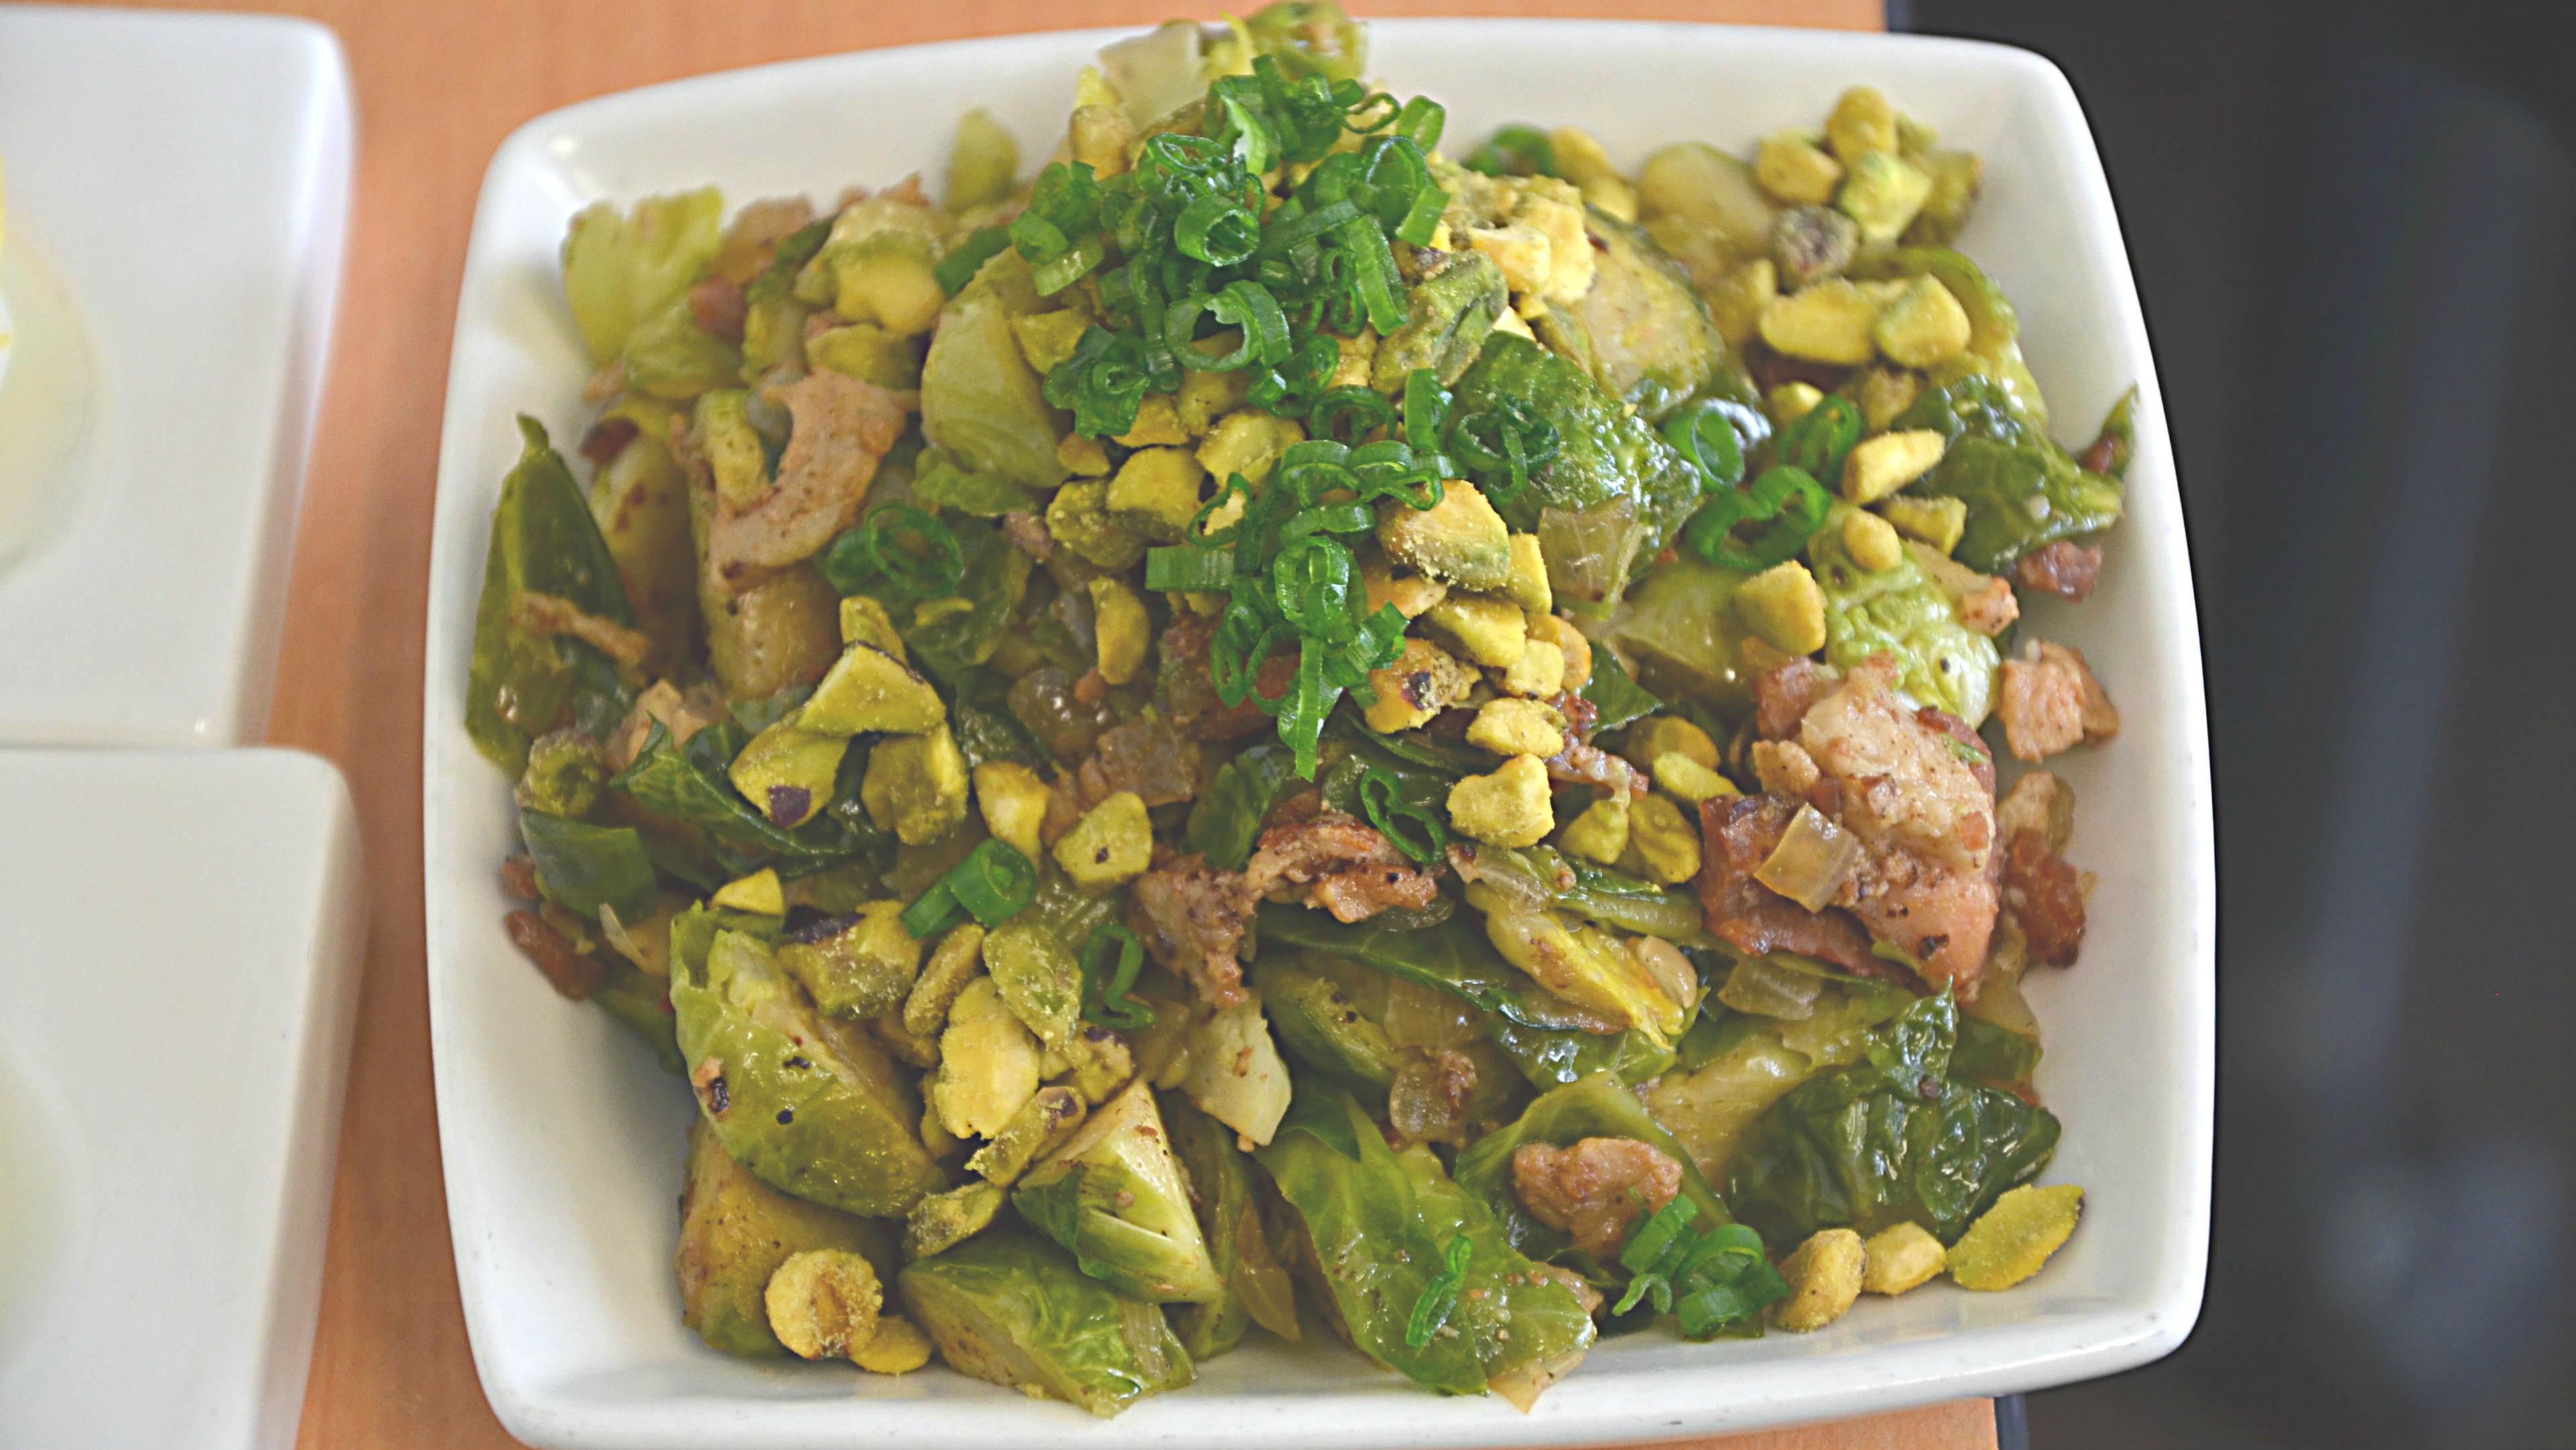 Photo: Brussels sprout salad for the Super Bowl